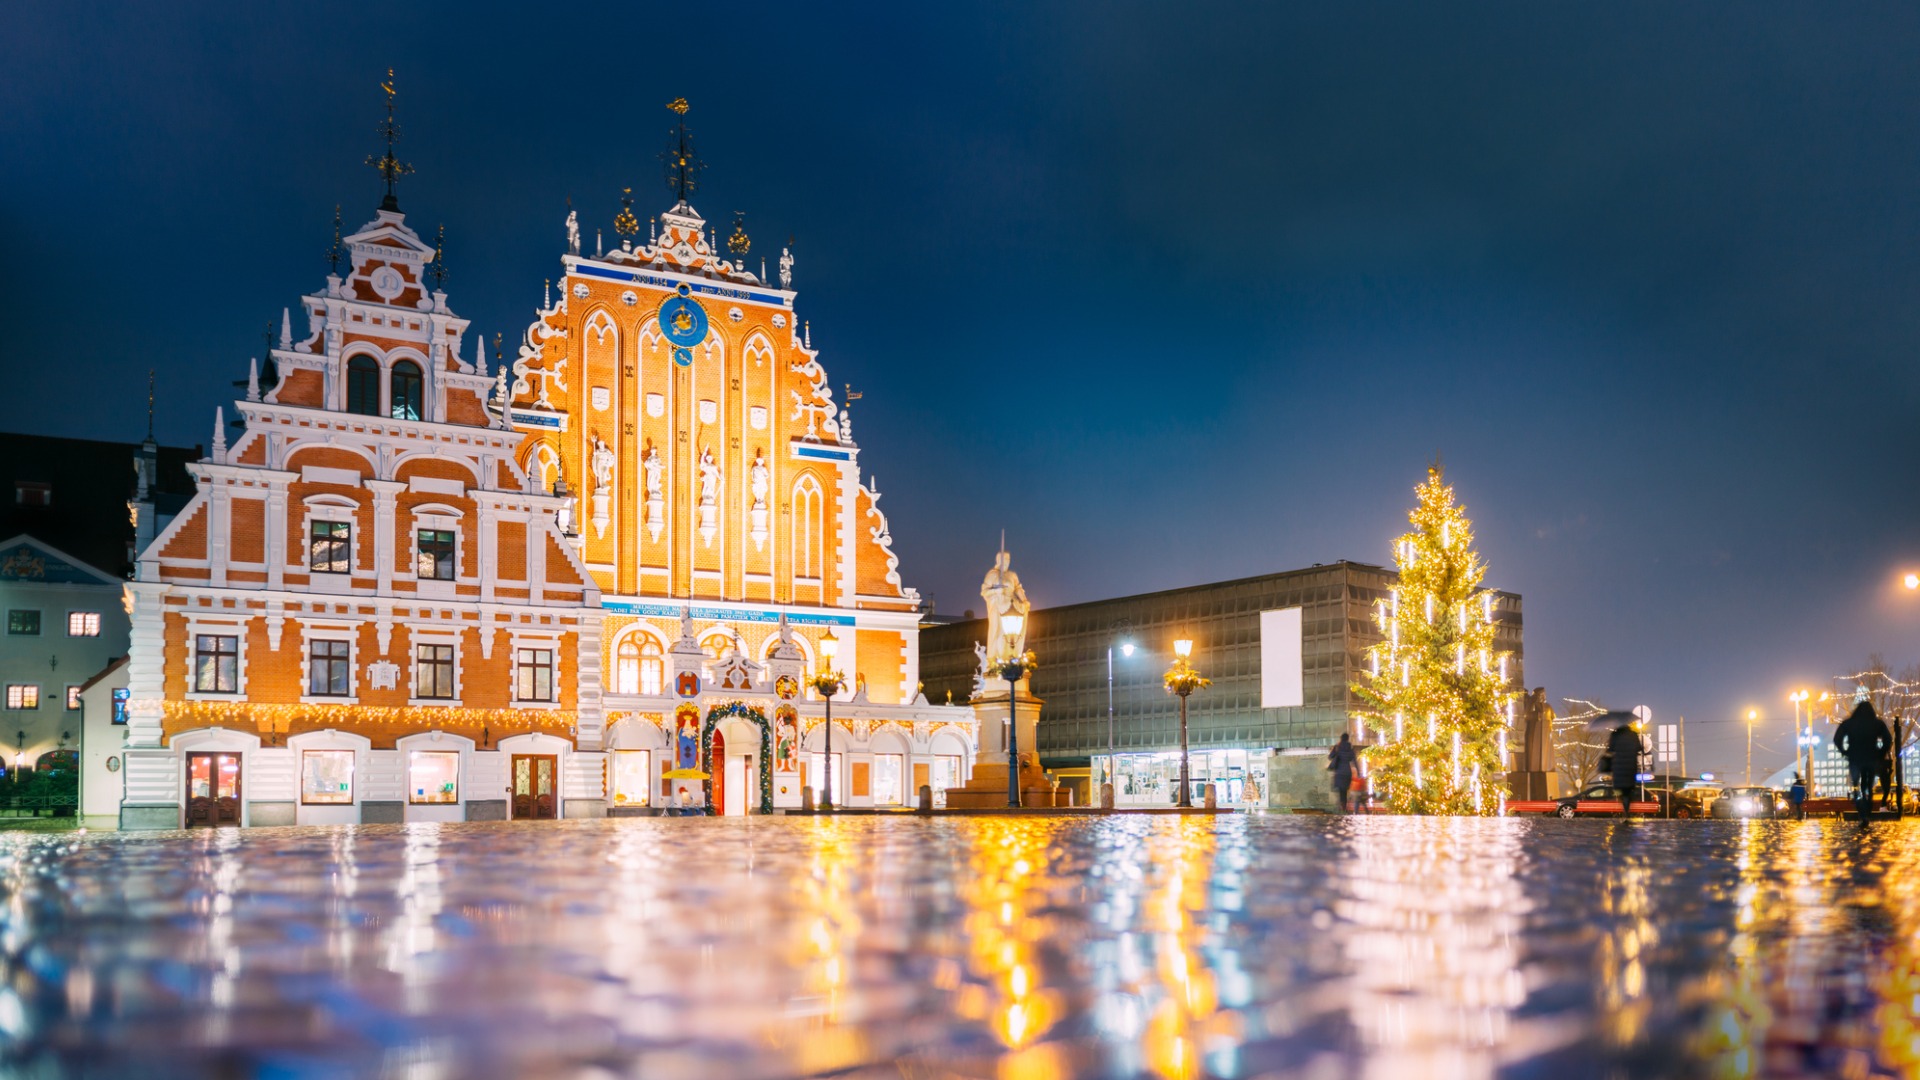 This image shows the facade of two beautiful buildings in Riga. There's also a Christmas tree and people walking. 